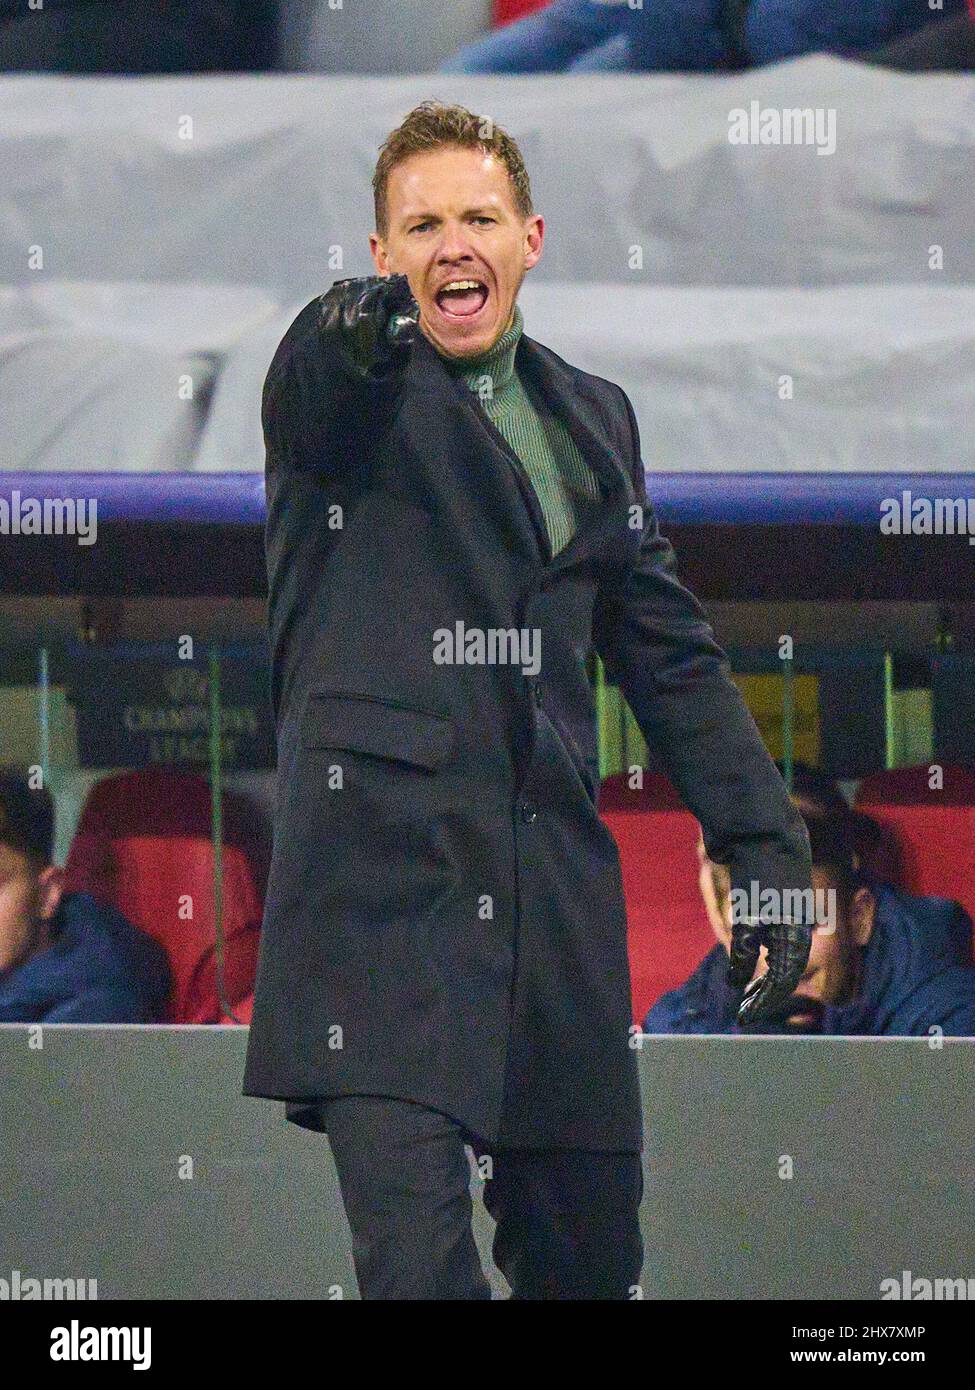 Trainer Julian Nagelsmann (FCB), team manager, headcoach, coach,   in the match   FC BAYERN MUENCHEN - FC Red Bull SALZBURG 7-1 of football UEFA Champions League, round of 16 in season 2021/2022 in Munich, Mar 8, 2022.  Achtelfinale, FCB, Red Bull,  © Peter Schatz / Alamy Live News Stock Photo